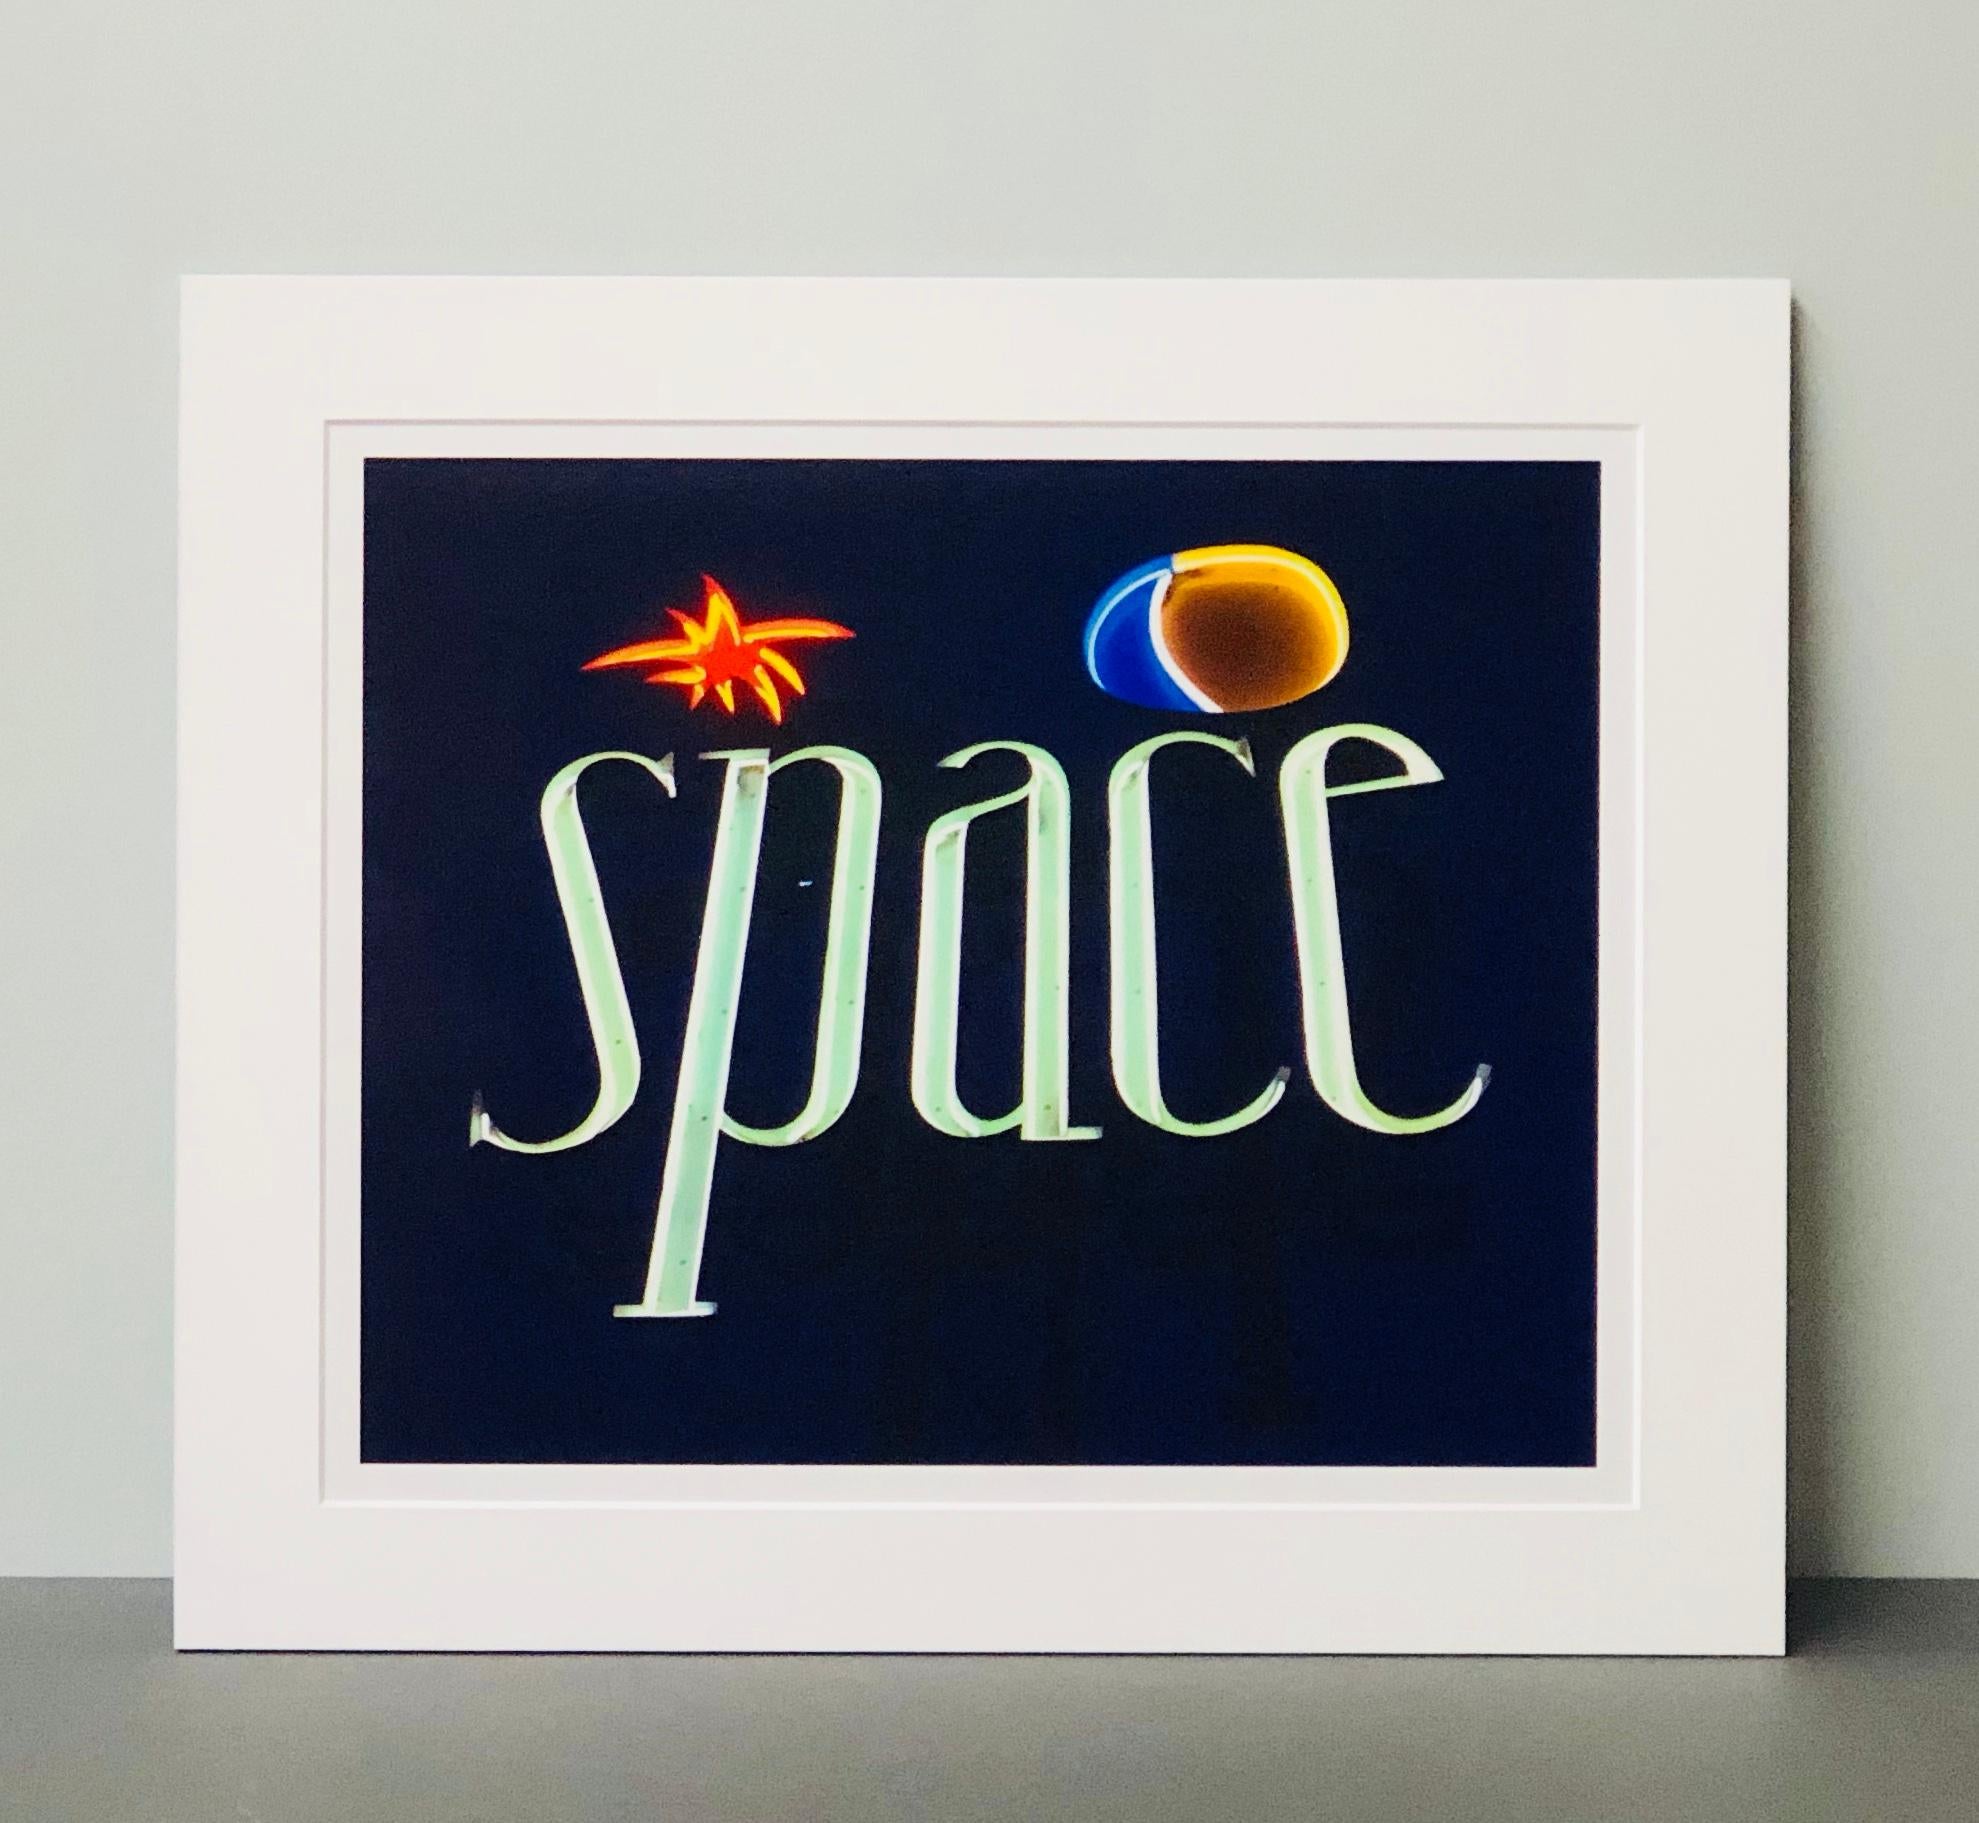 Space, Ibiza, the Balearic Islands - Contemporary Color Sign Photography 1